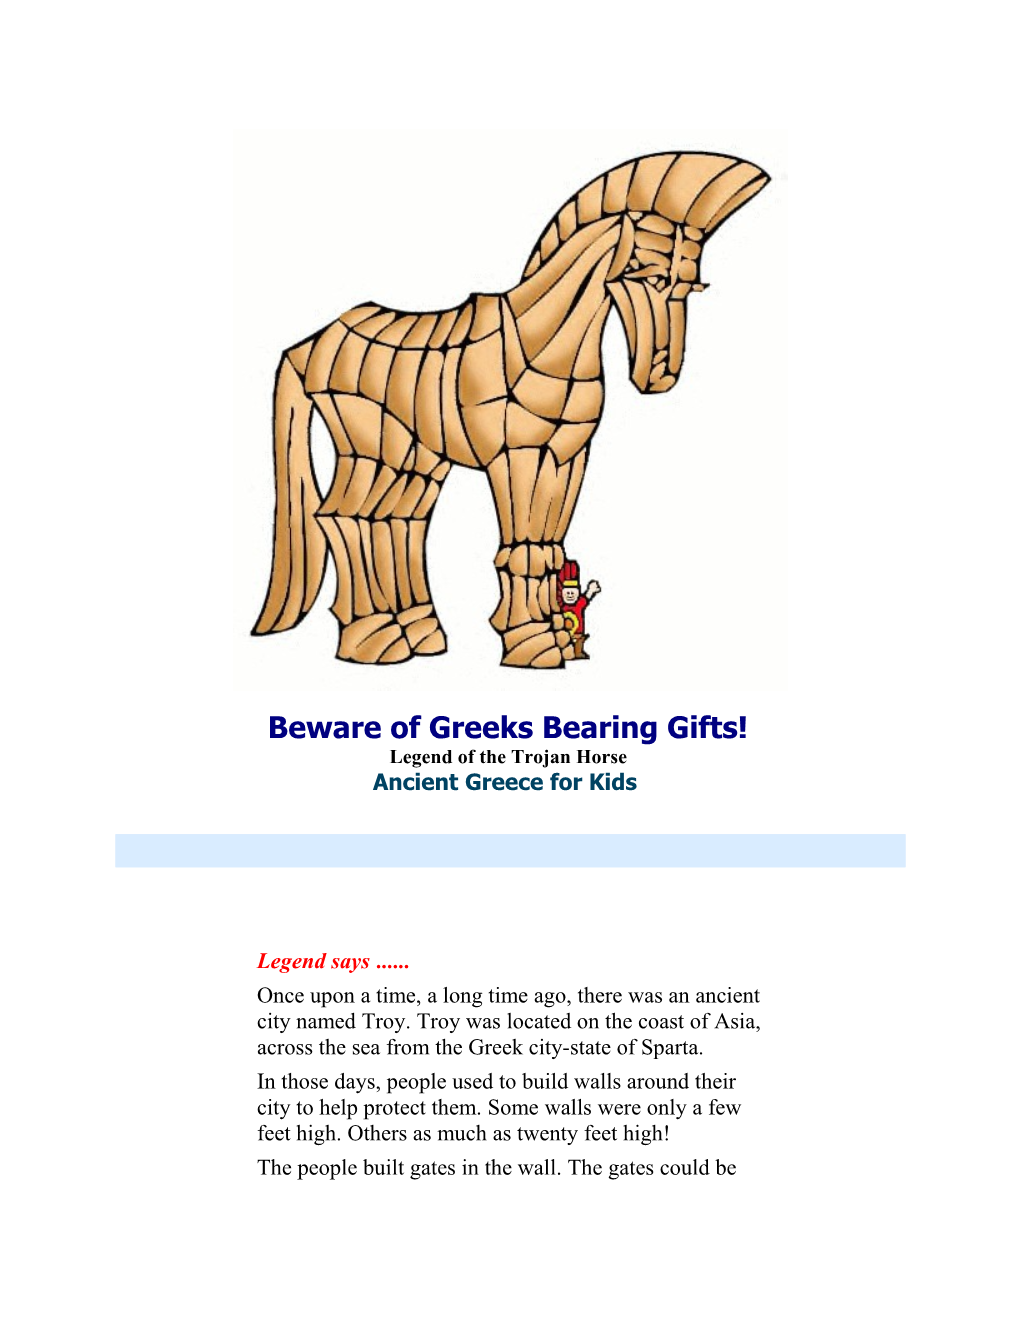 Beware of Greeks Bearing Gifts! Legend of the Trojan Horse Ancient Greece for Kids